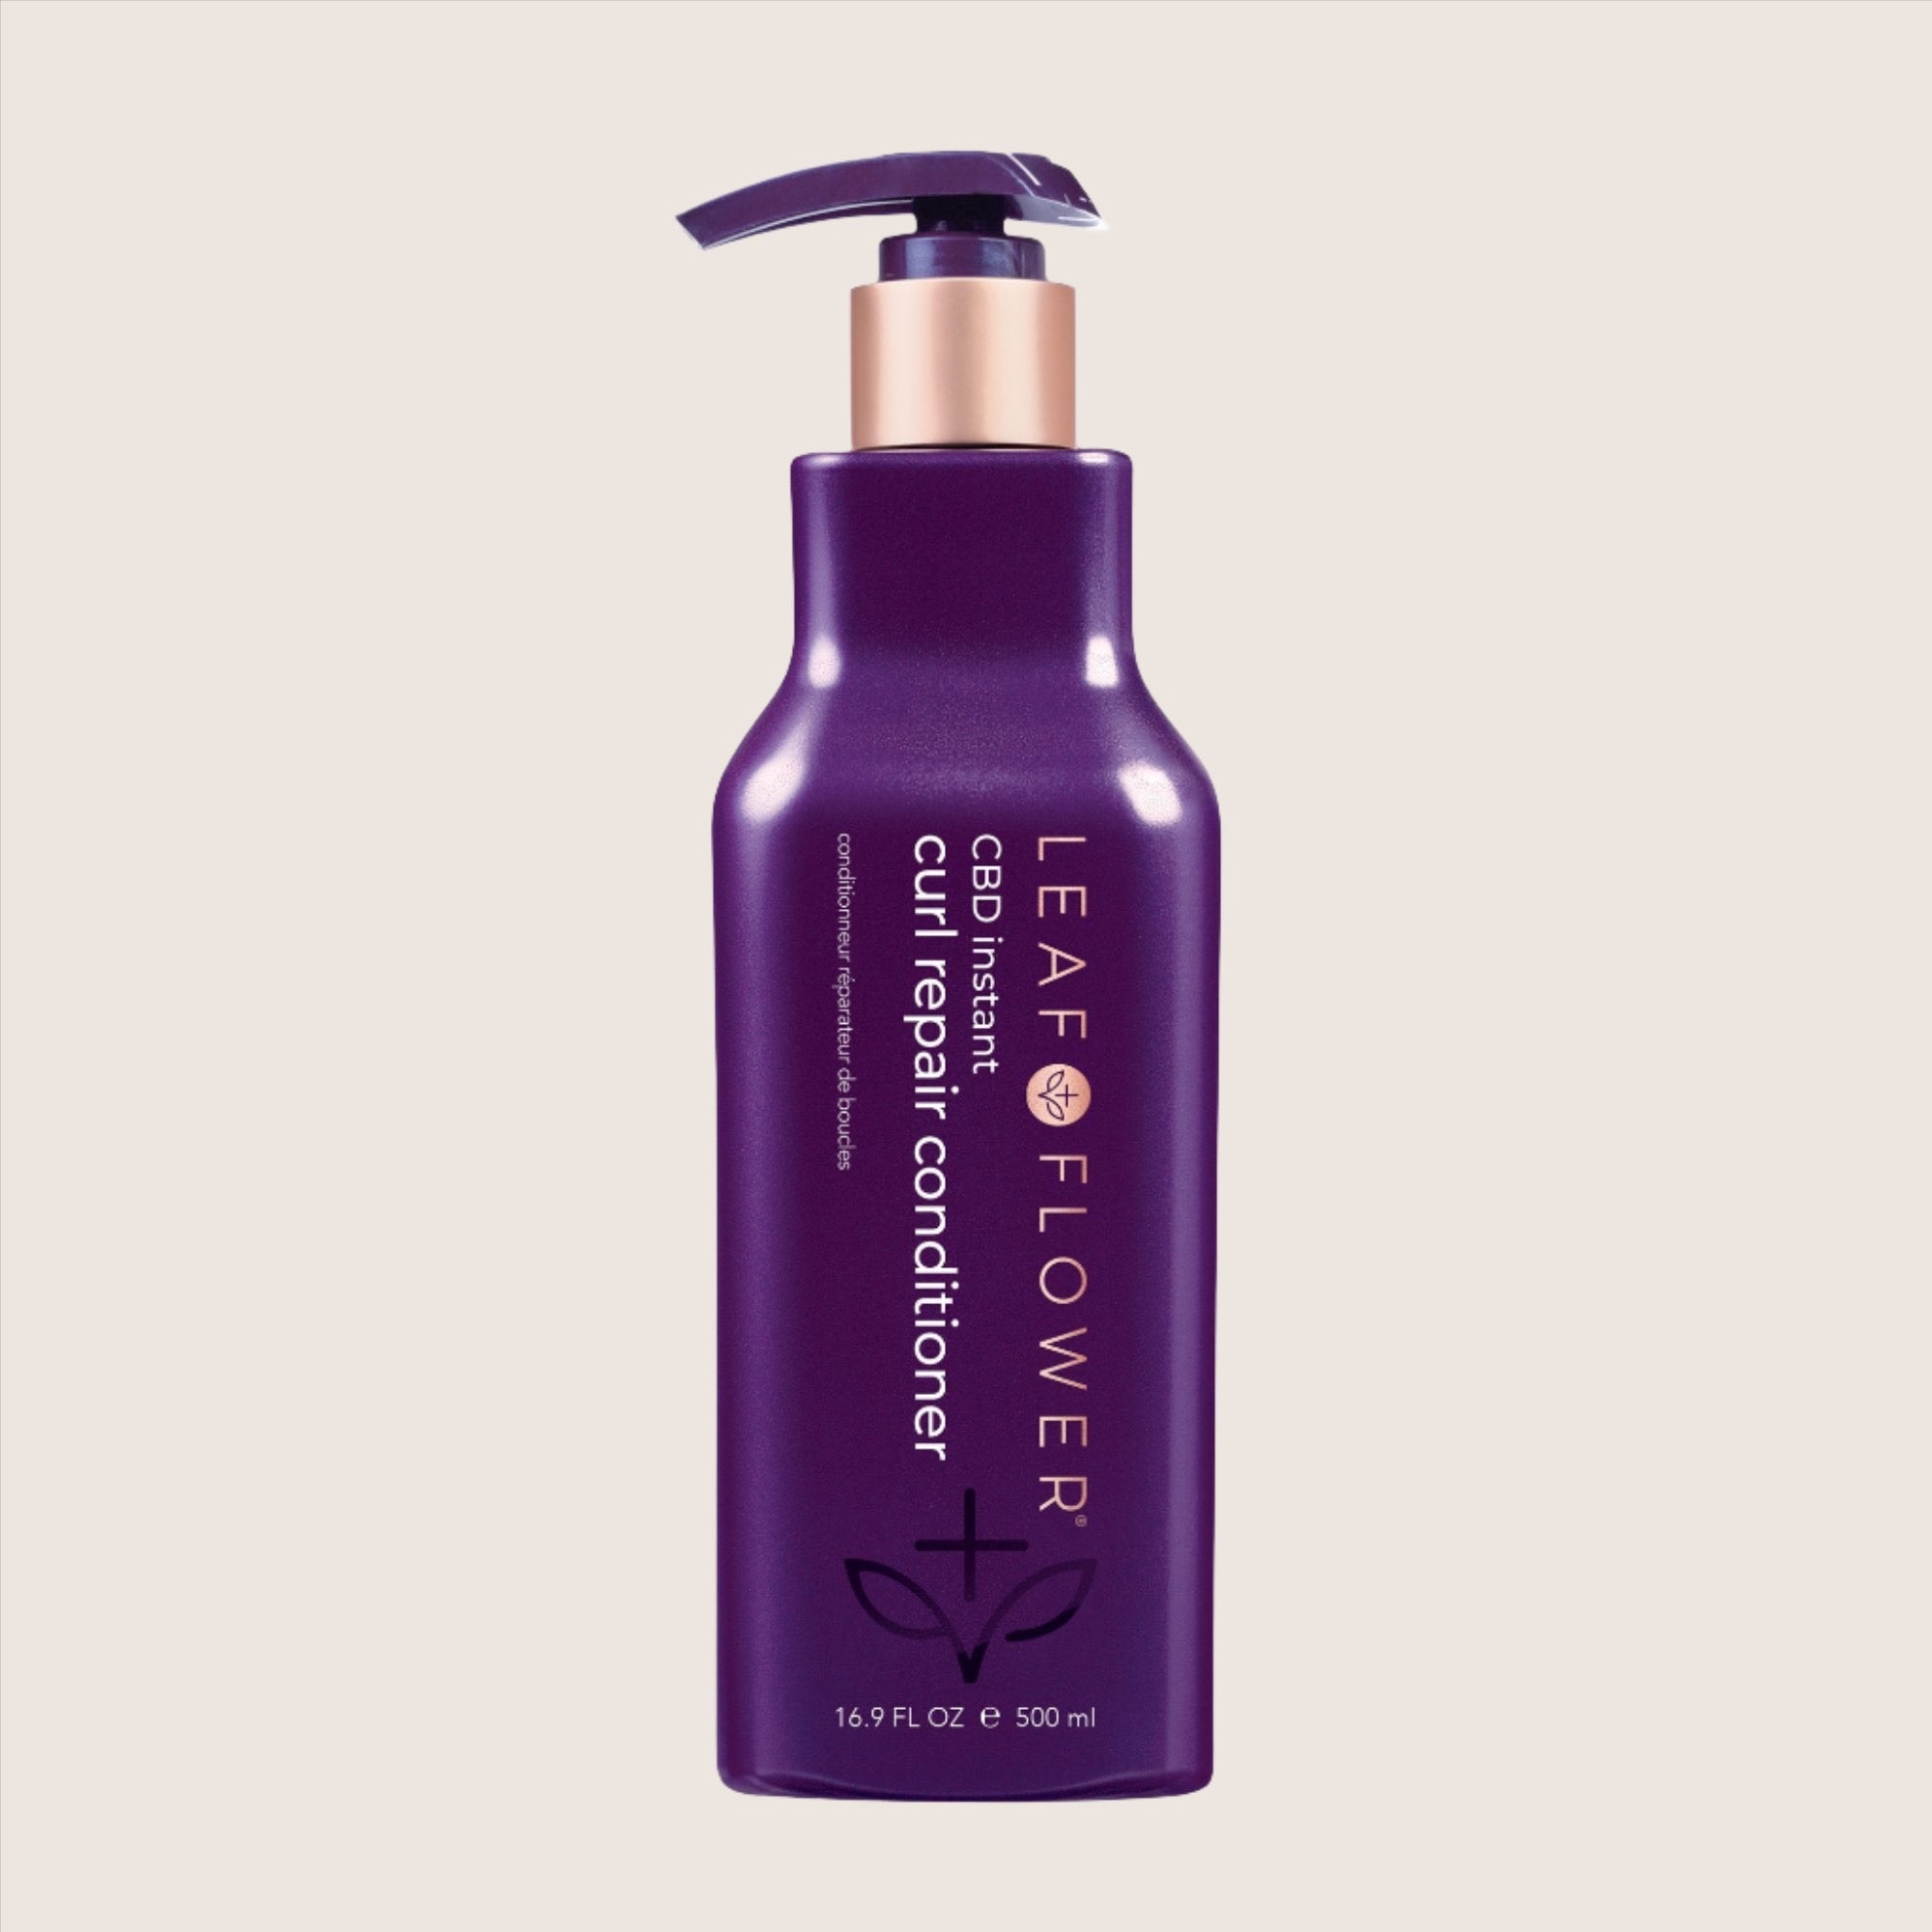 A purple bottle of Leaf and Flower Instant Curl Repair Conditioner - Multiple Sizes with a pump dispenser, offering 16.9 FL OZ / 500 mL capacity. This vegan-friendly conditioner provides curl hydration and frizz reduction for beautifully soft and manageable curls.